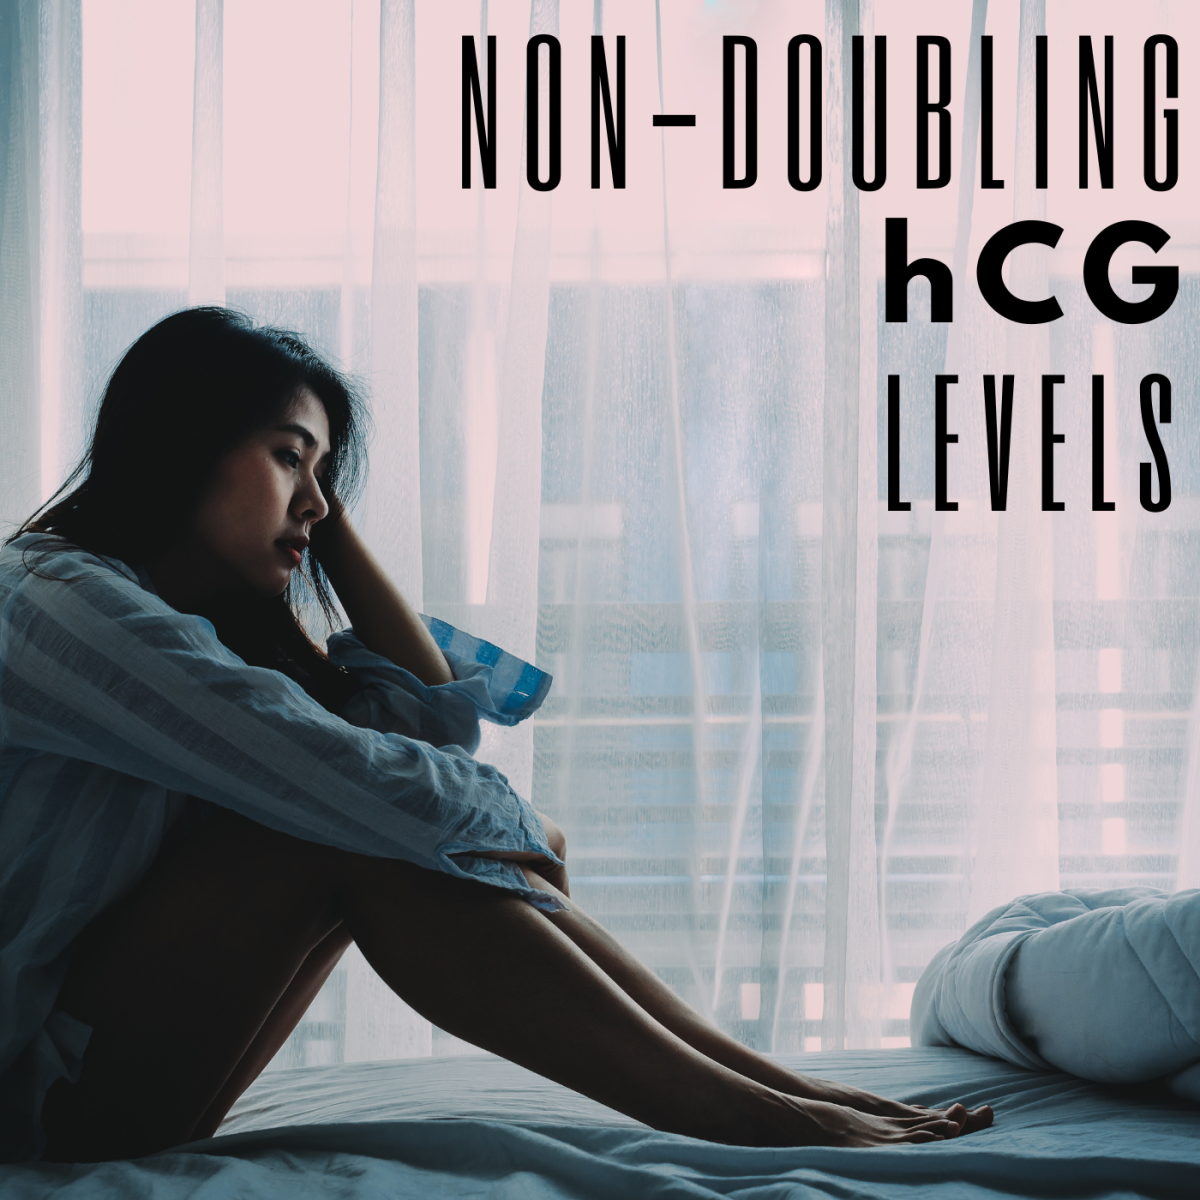 The First Trimester and Non-Doubling hCG Levels